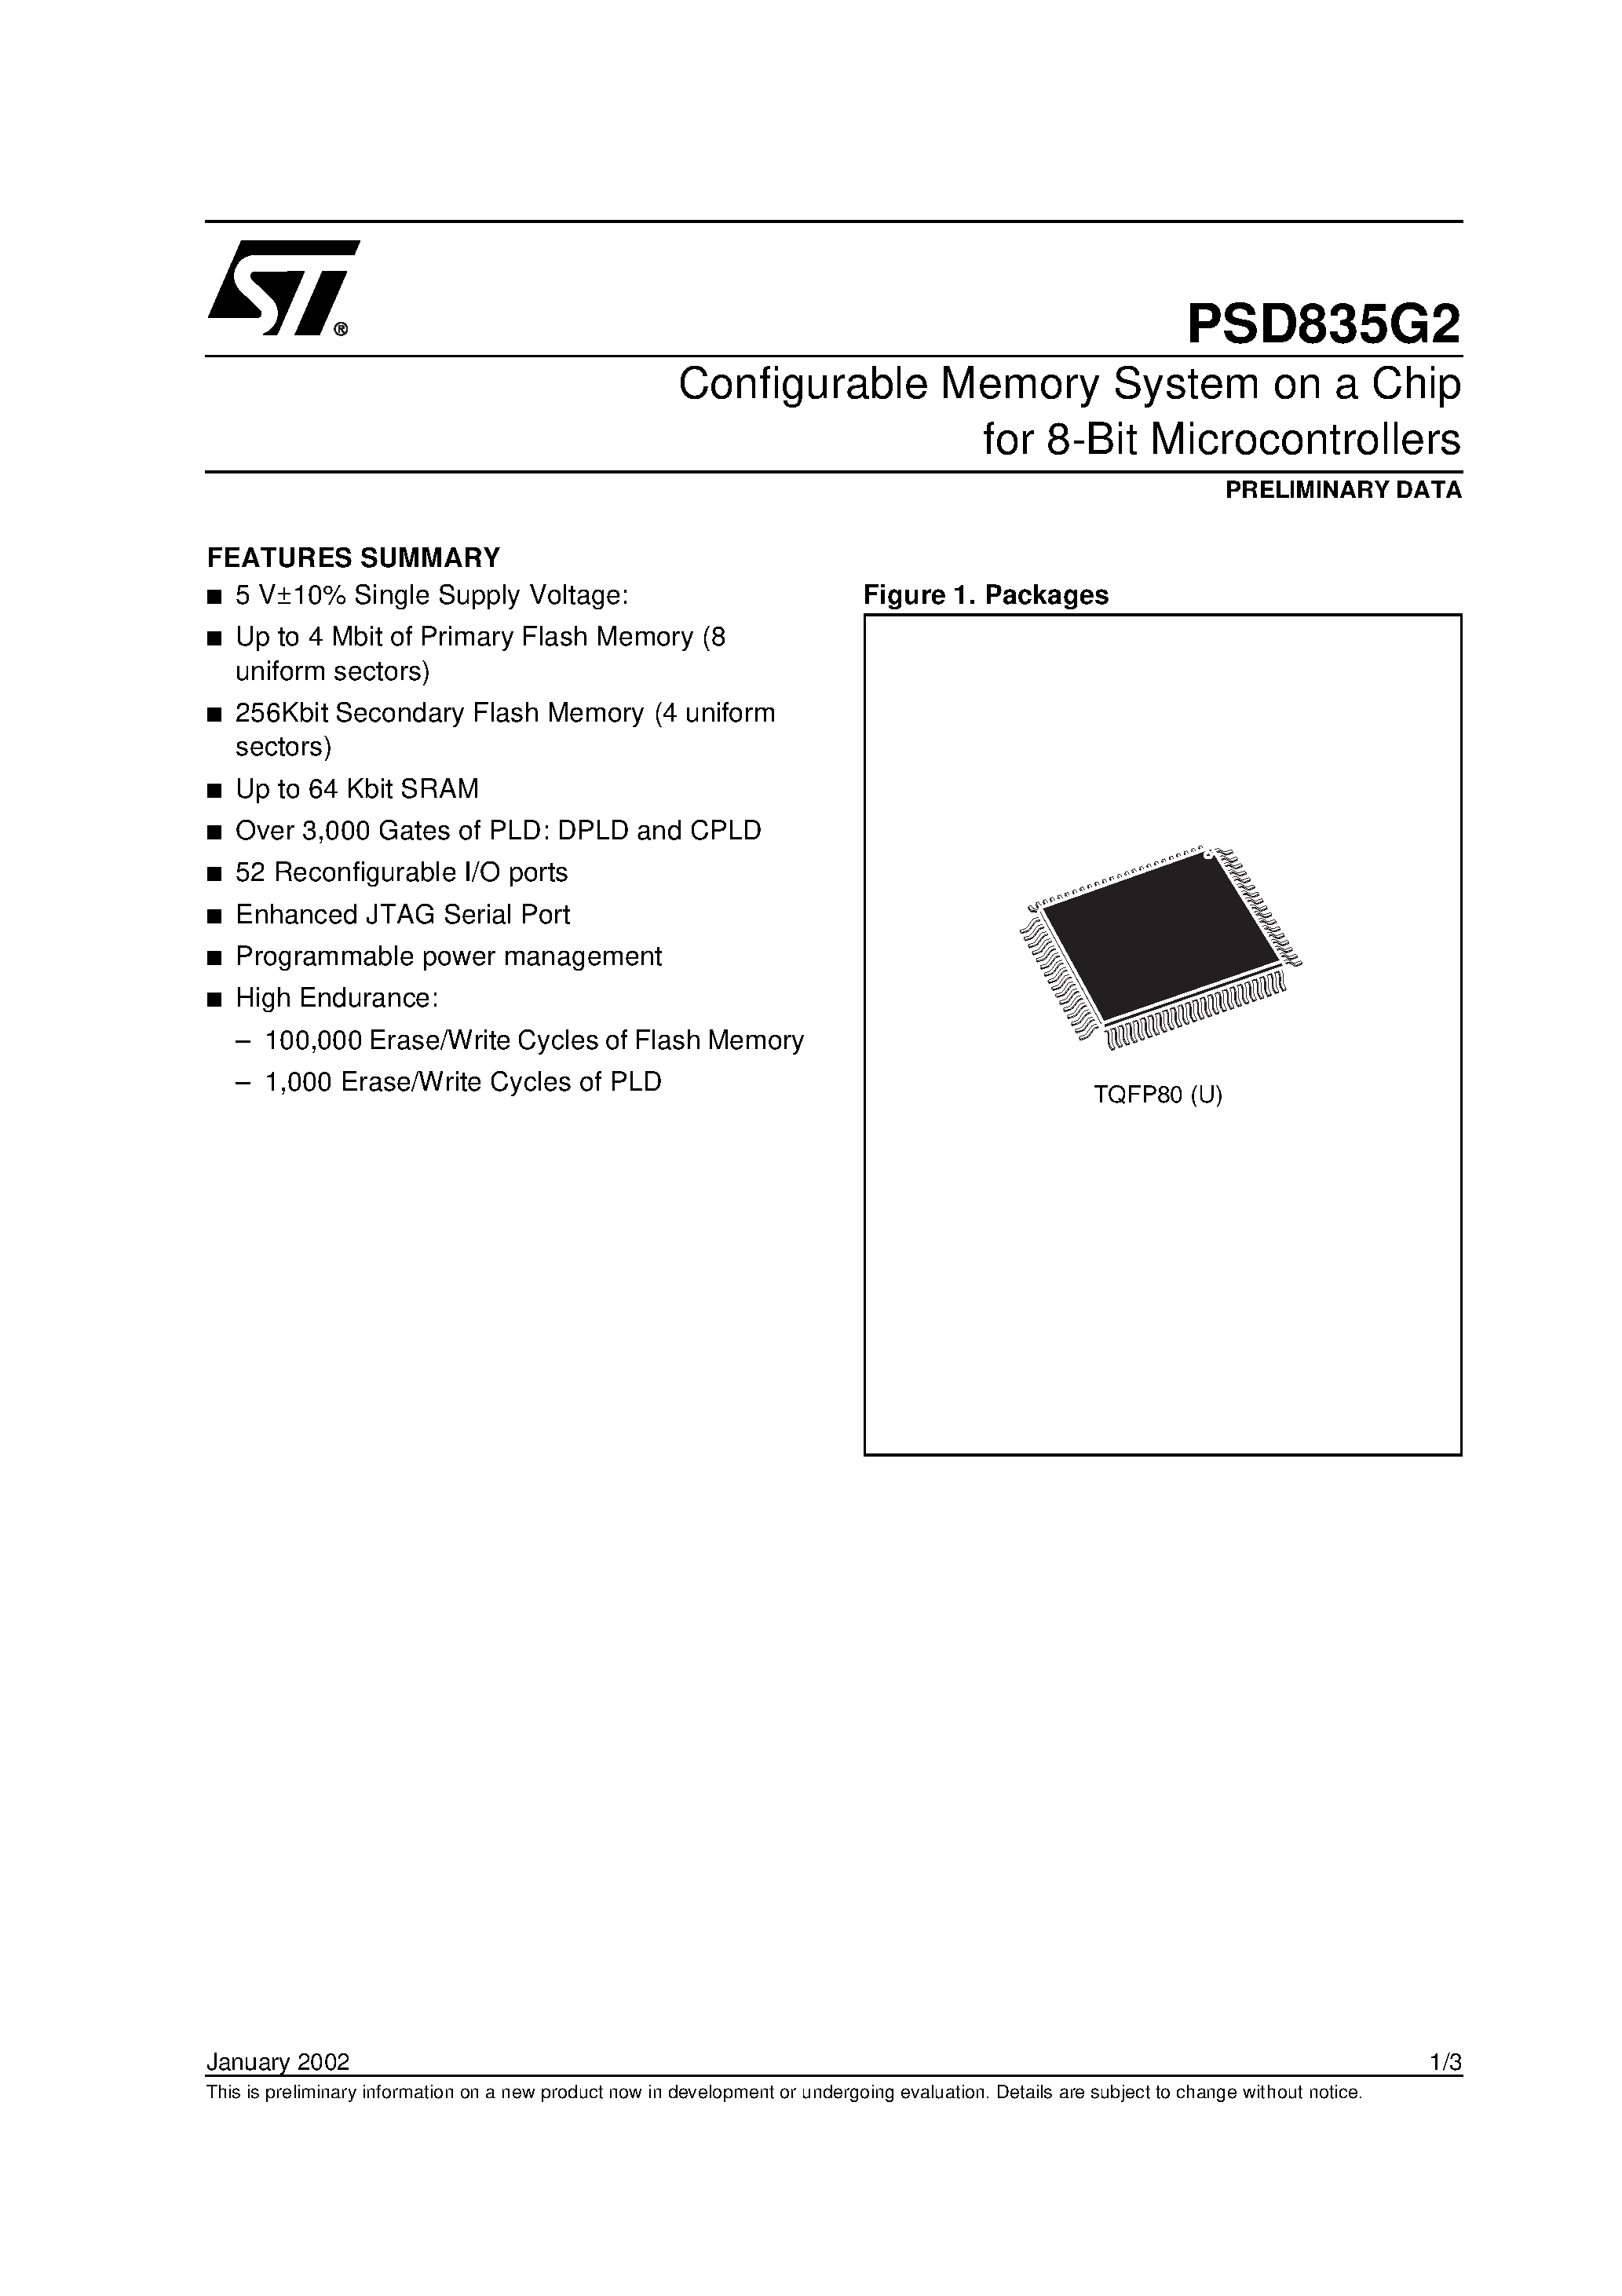 Datasheet PSD835F2-A-20U - Configurable Memory System on a Chip for 8-Bit Microcontrollers page 1